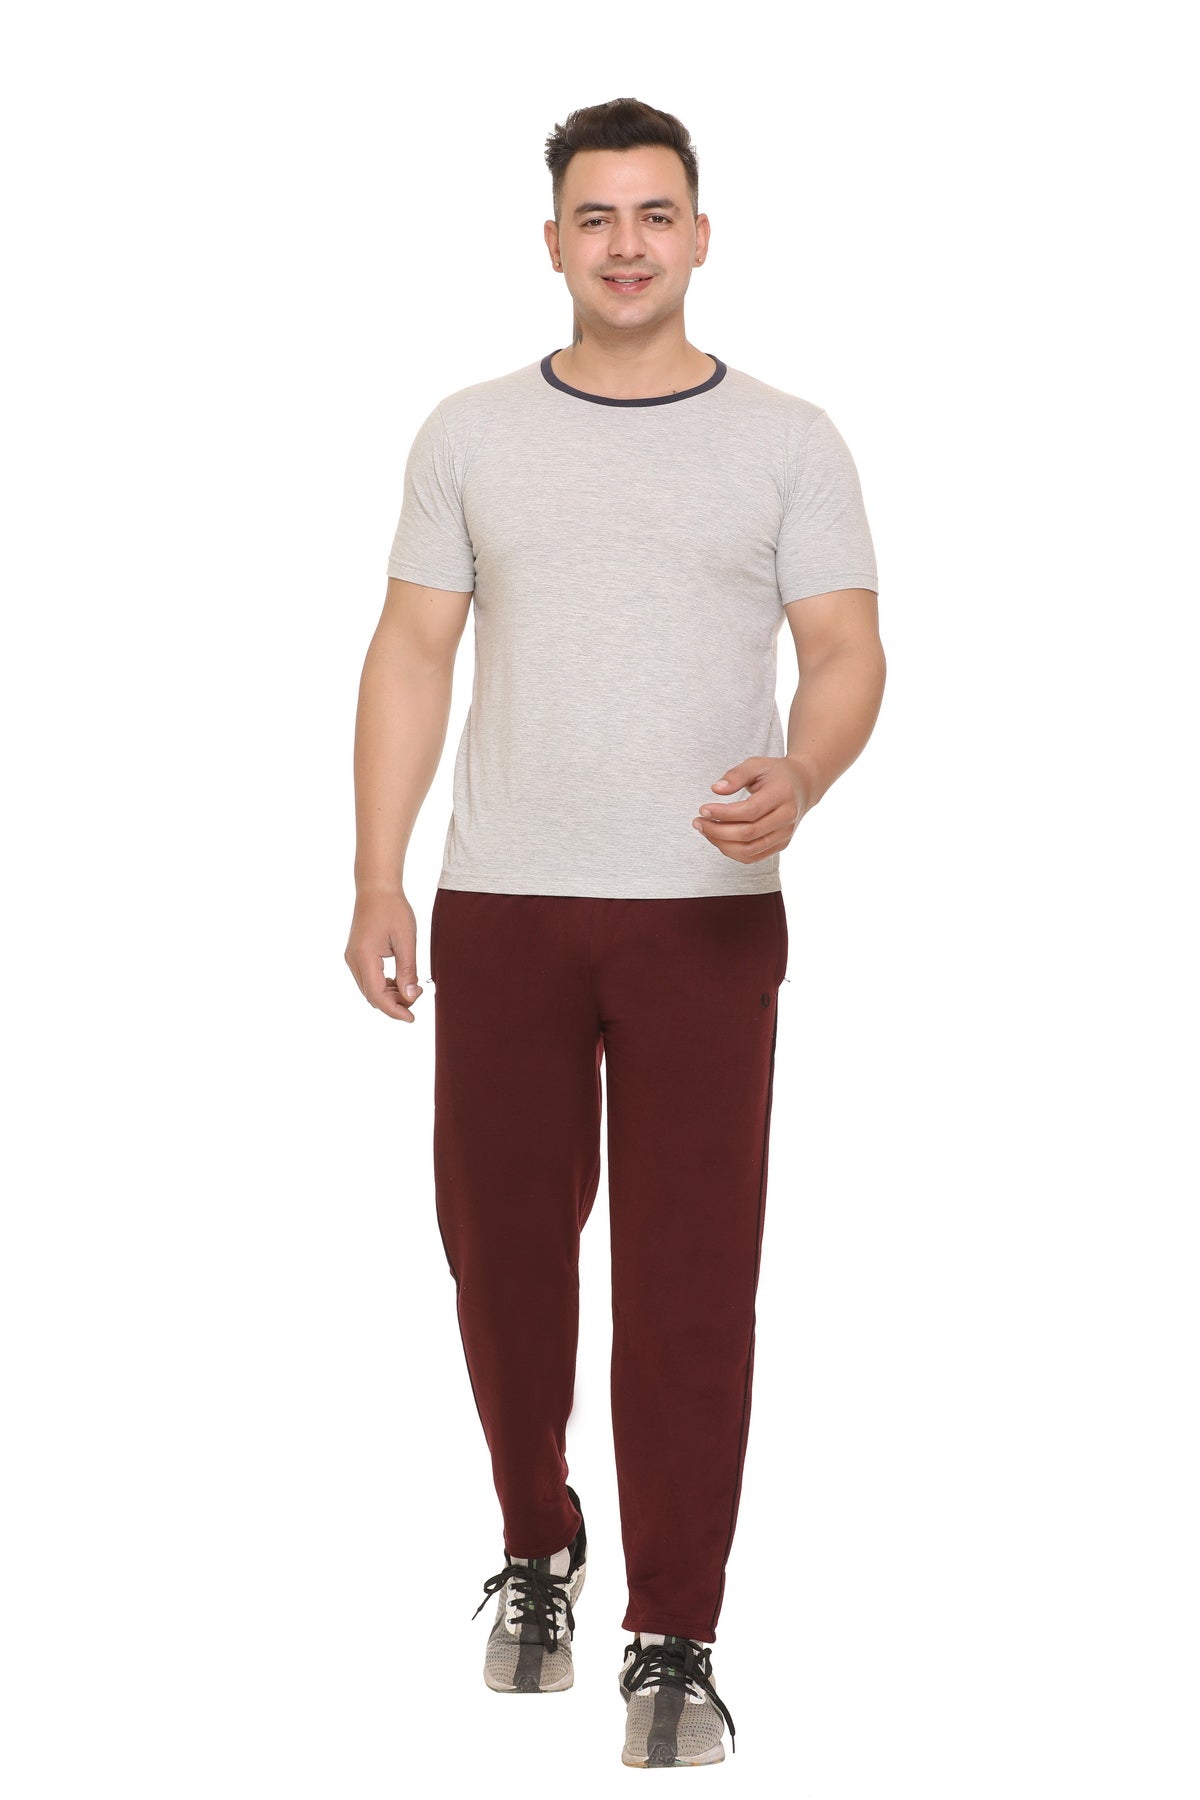 Buy Casual and Formal Dress Pants for Men at Best Price at French Crown